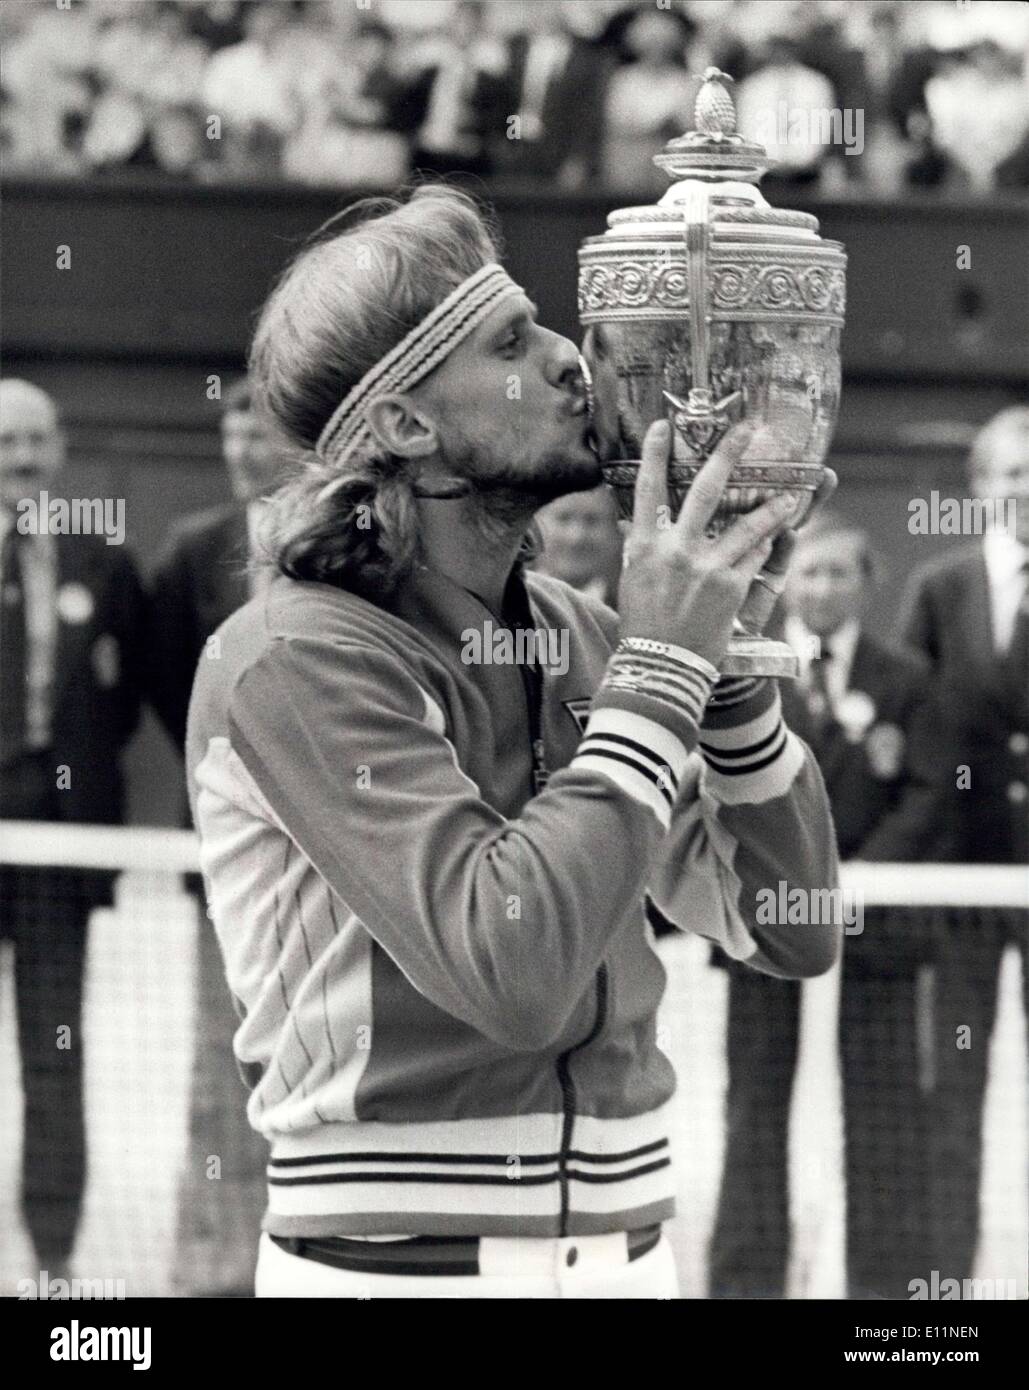 Jul. 07, 1979 - Bjorn Borg Wins His Fourth Successive Wimbledon Title Beating Roscoe Tanner In Five Sets: Today of the Centre Court at Wimbledon Bjorn Borg of Sweden won the Men's Singles title for the fourth Successive time when he beat the American Roscoe Tanner in five sets. Photo shows Borg kissing the trophy after winning the men's singles title once again on the centre court at Wimbledon today. Stock Photo